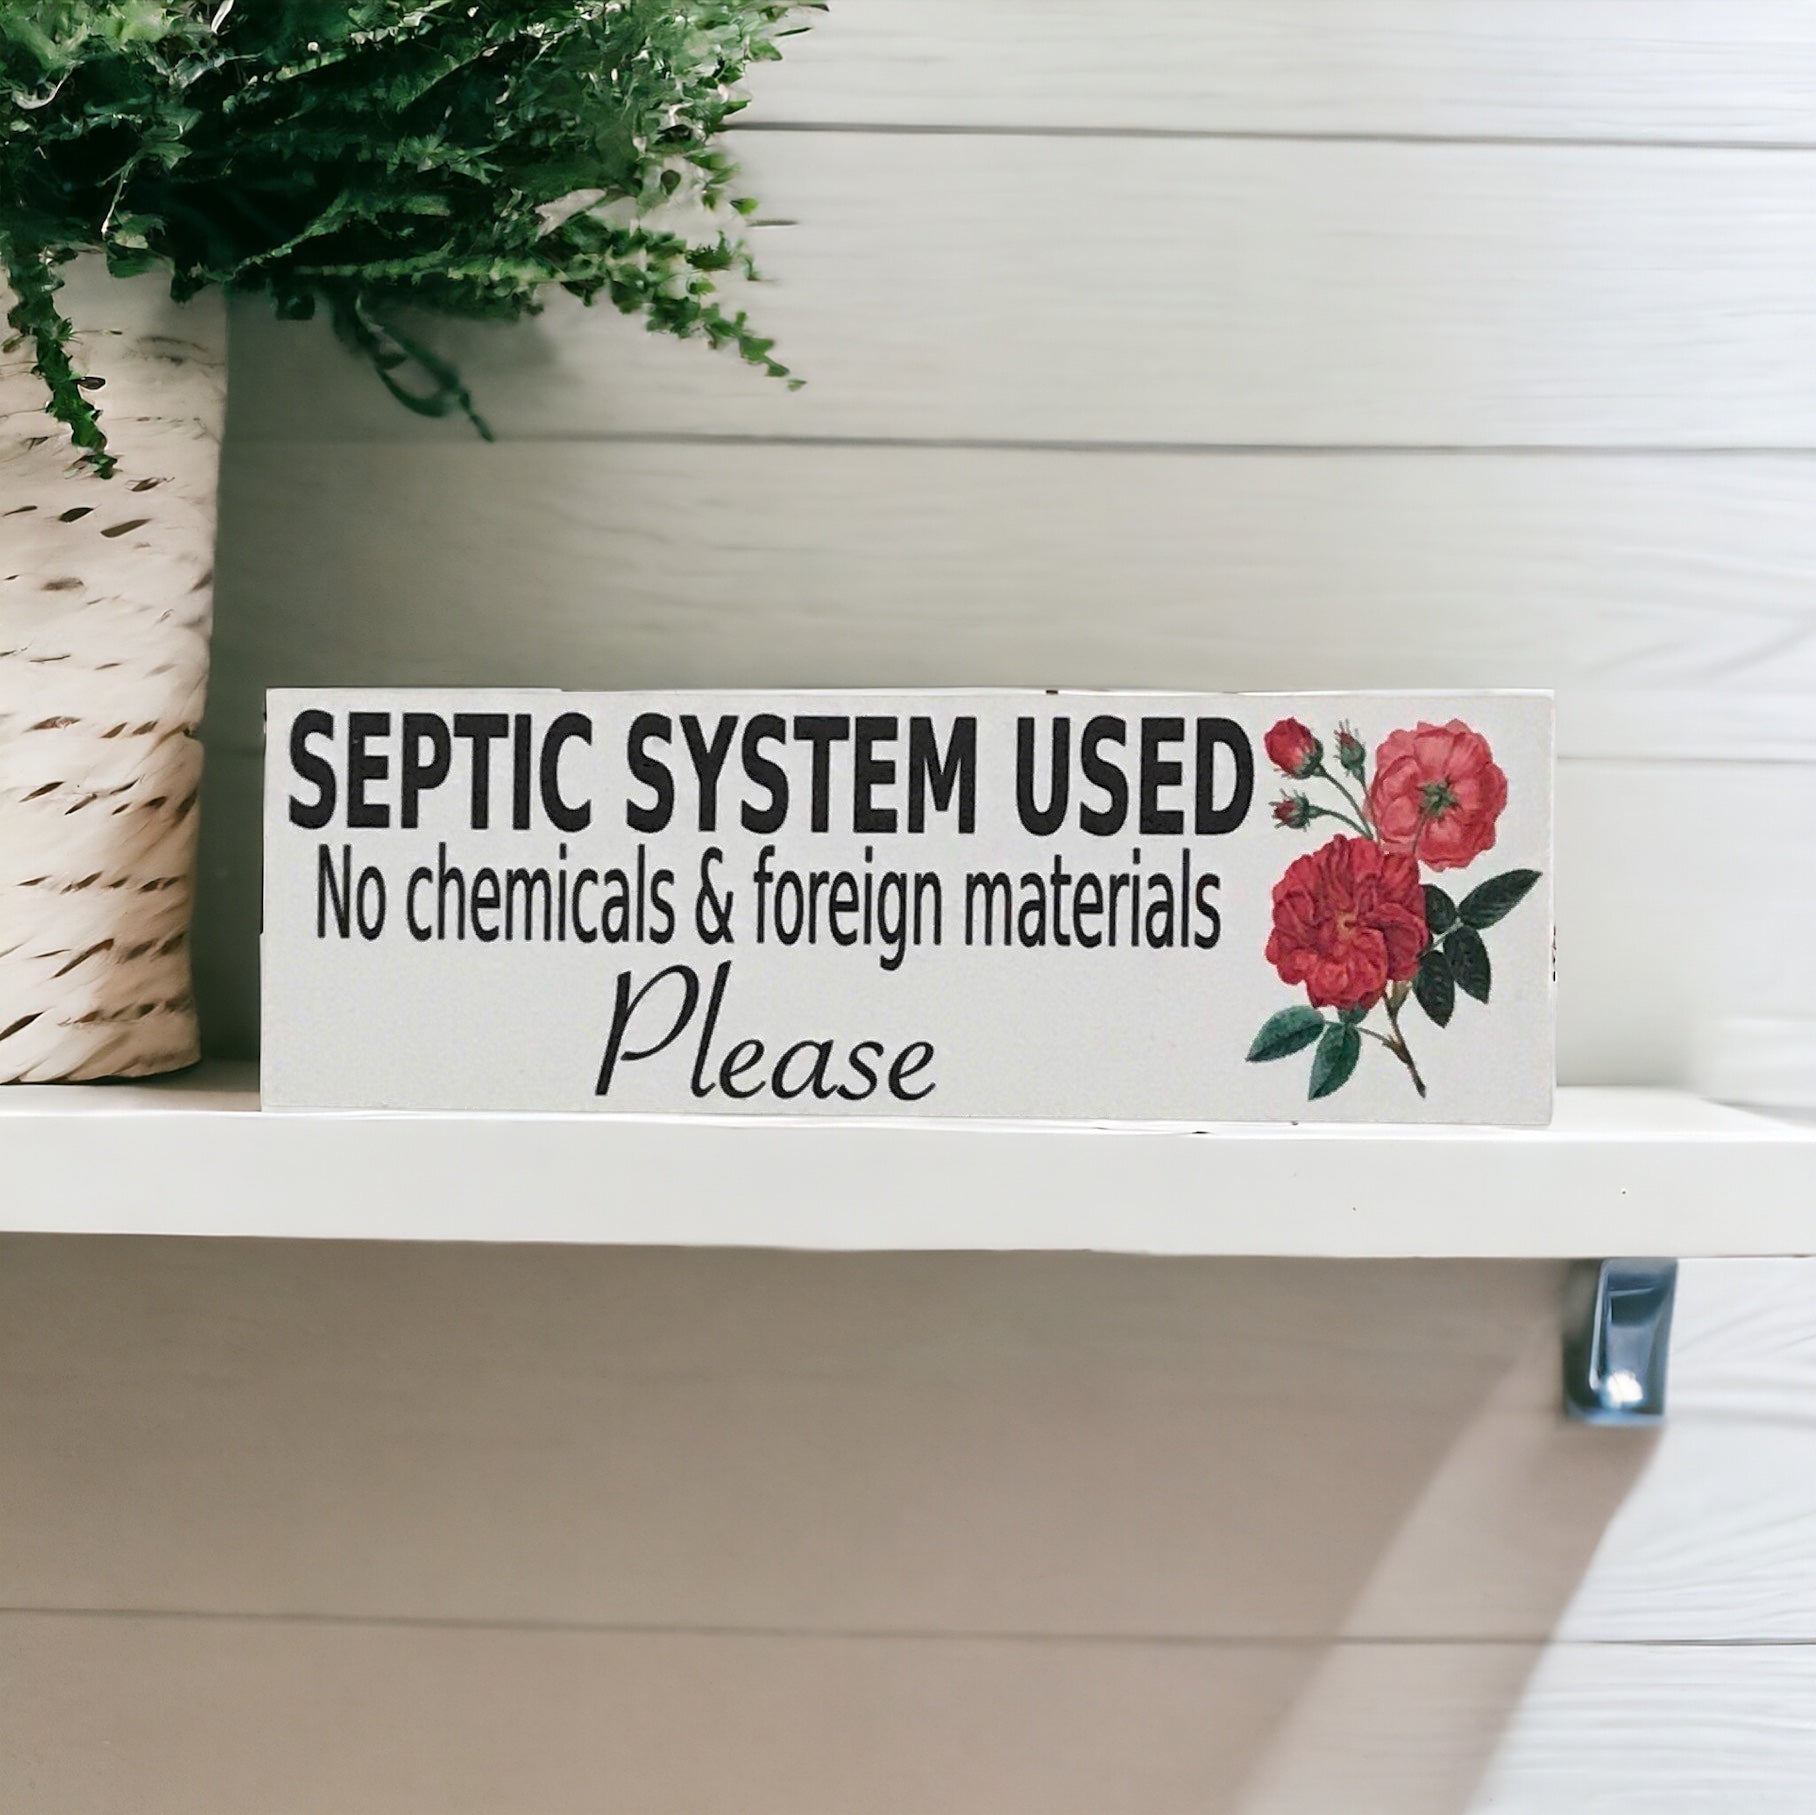 Toilet Bathroom Flush Eco Red Rose Bud Sign - The Renmy Store Homewares & Gifts 